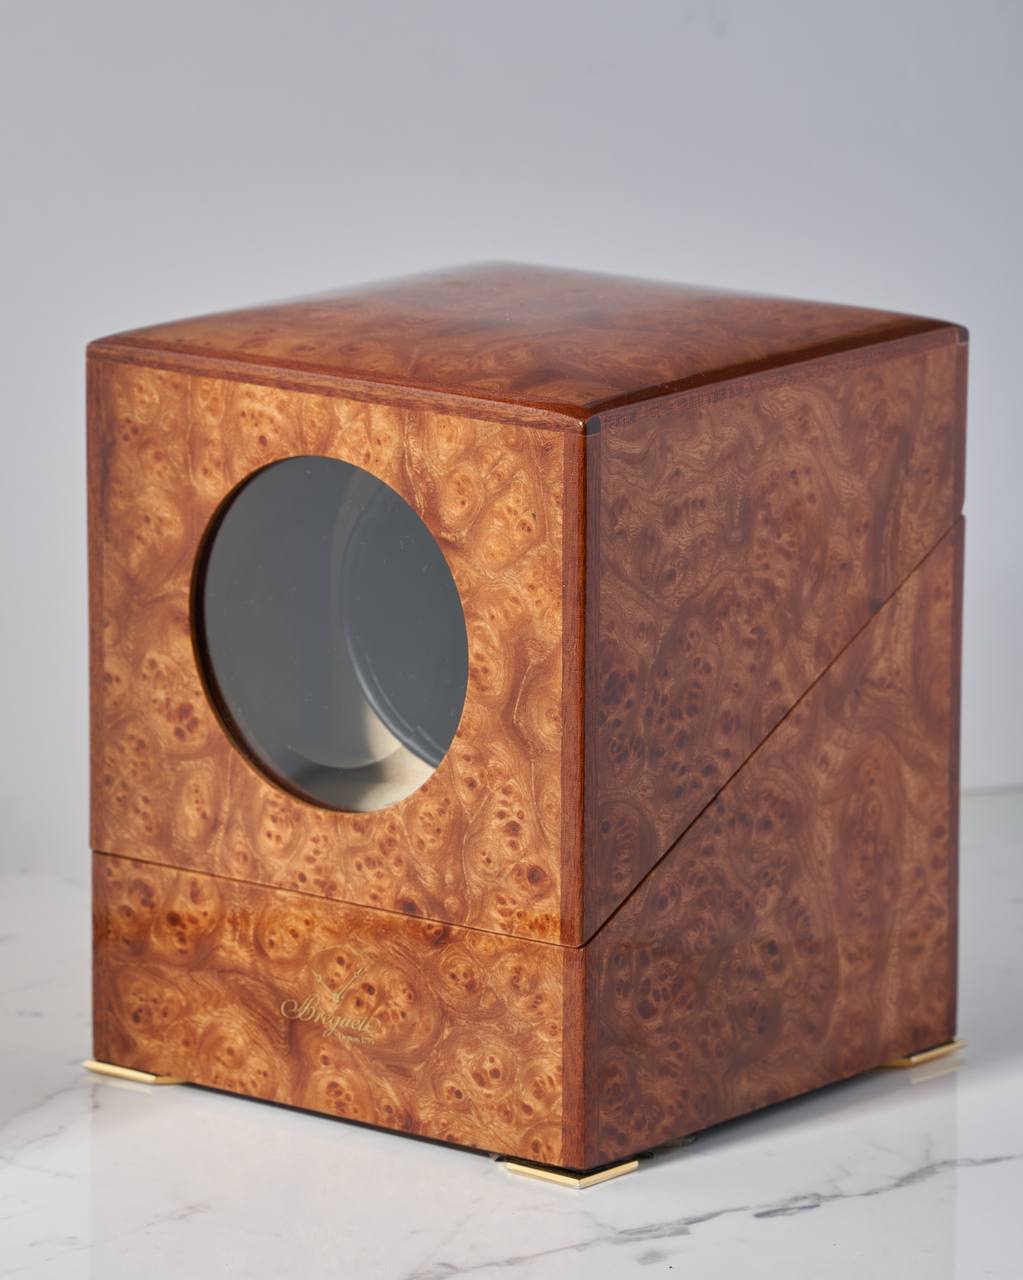 Breguet Luxury Watch Winder Lacquered Burlywood with Domed Window